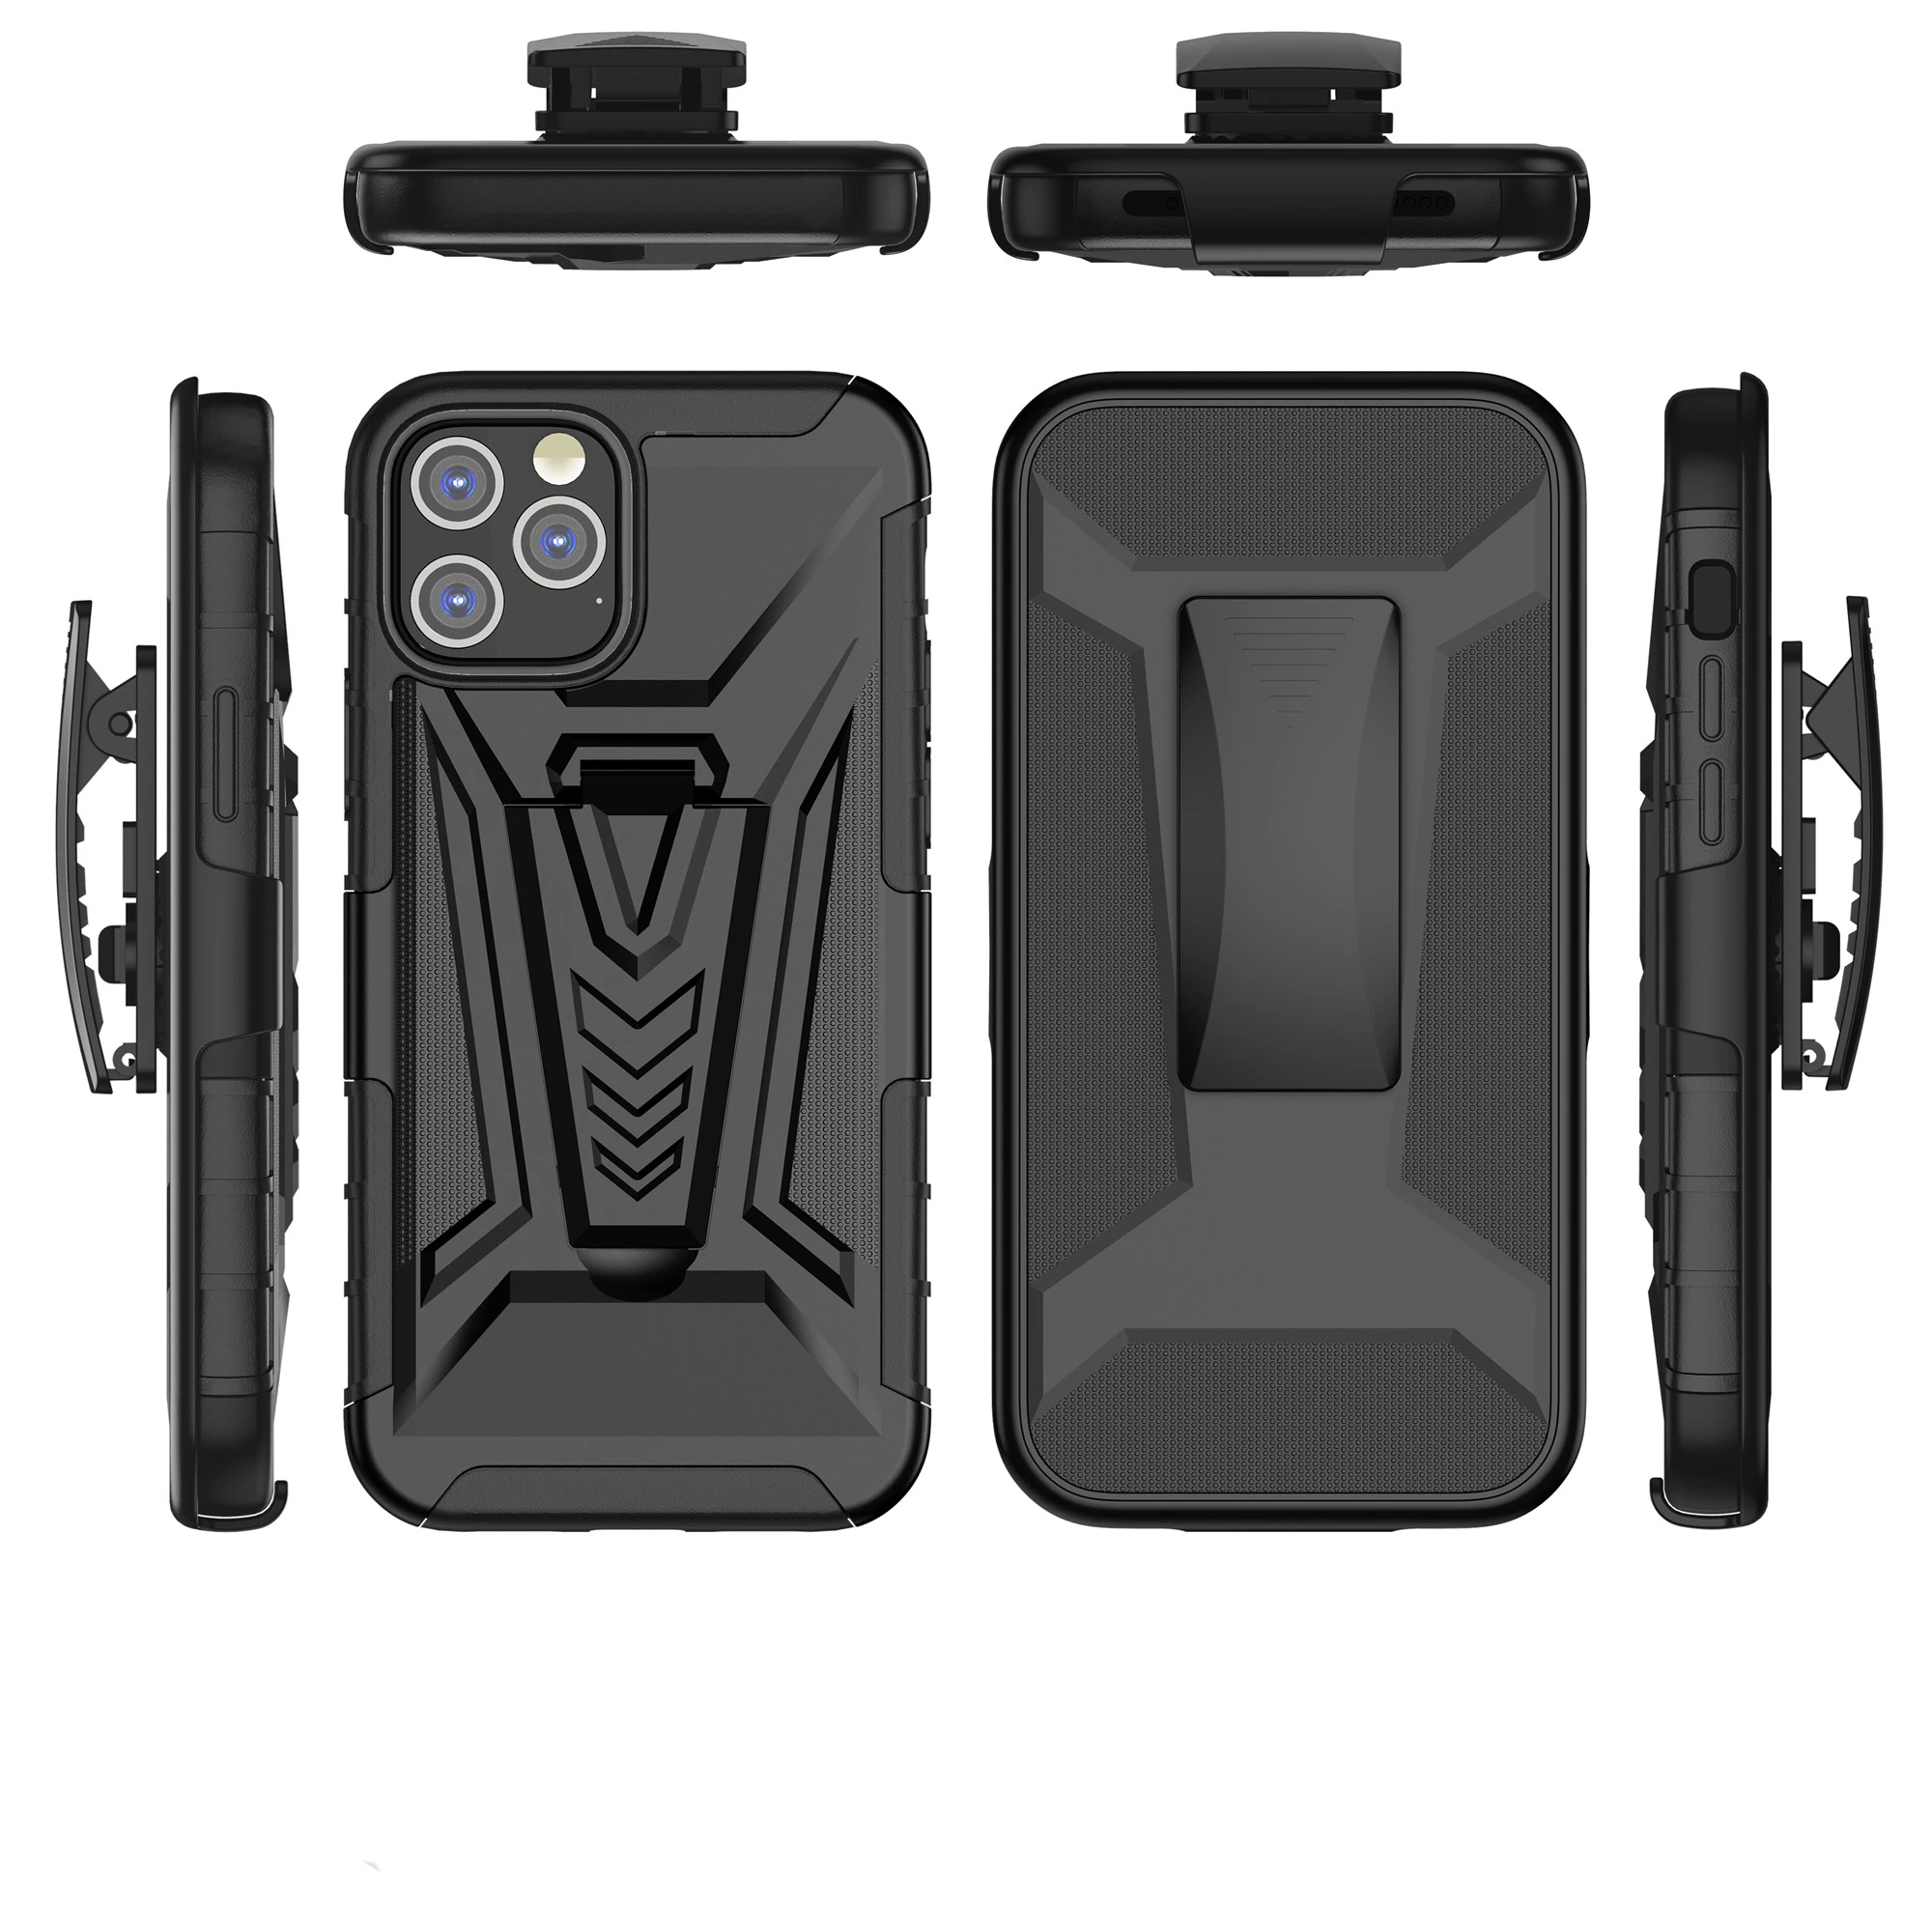 13 pro max cases New Heavy Duty Shockproof Armor Case for iPhone 13 11 Pro Max 12 Mini XR XS SE 2020 6S 7 8 Plus Coque Belt Clip Kickstand Cover iphone 13 pro max cover